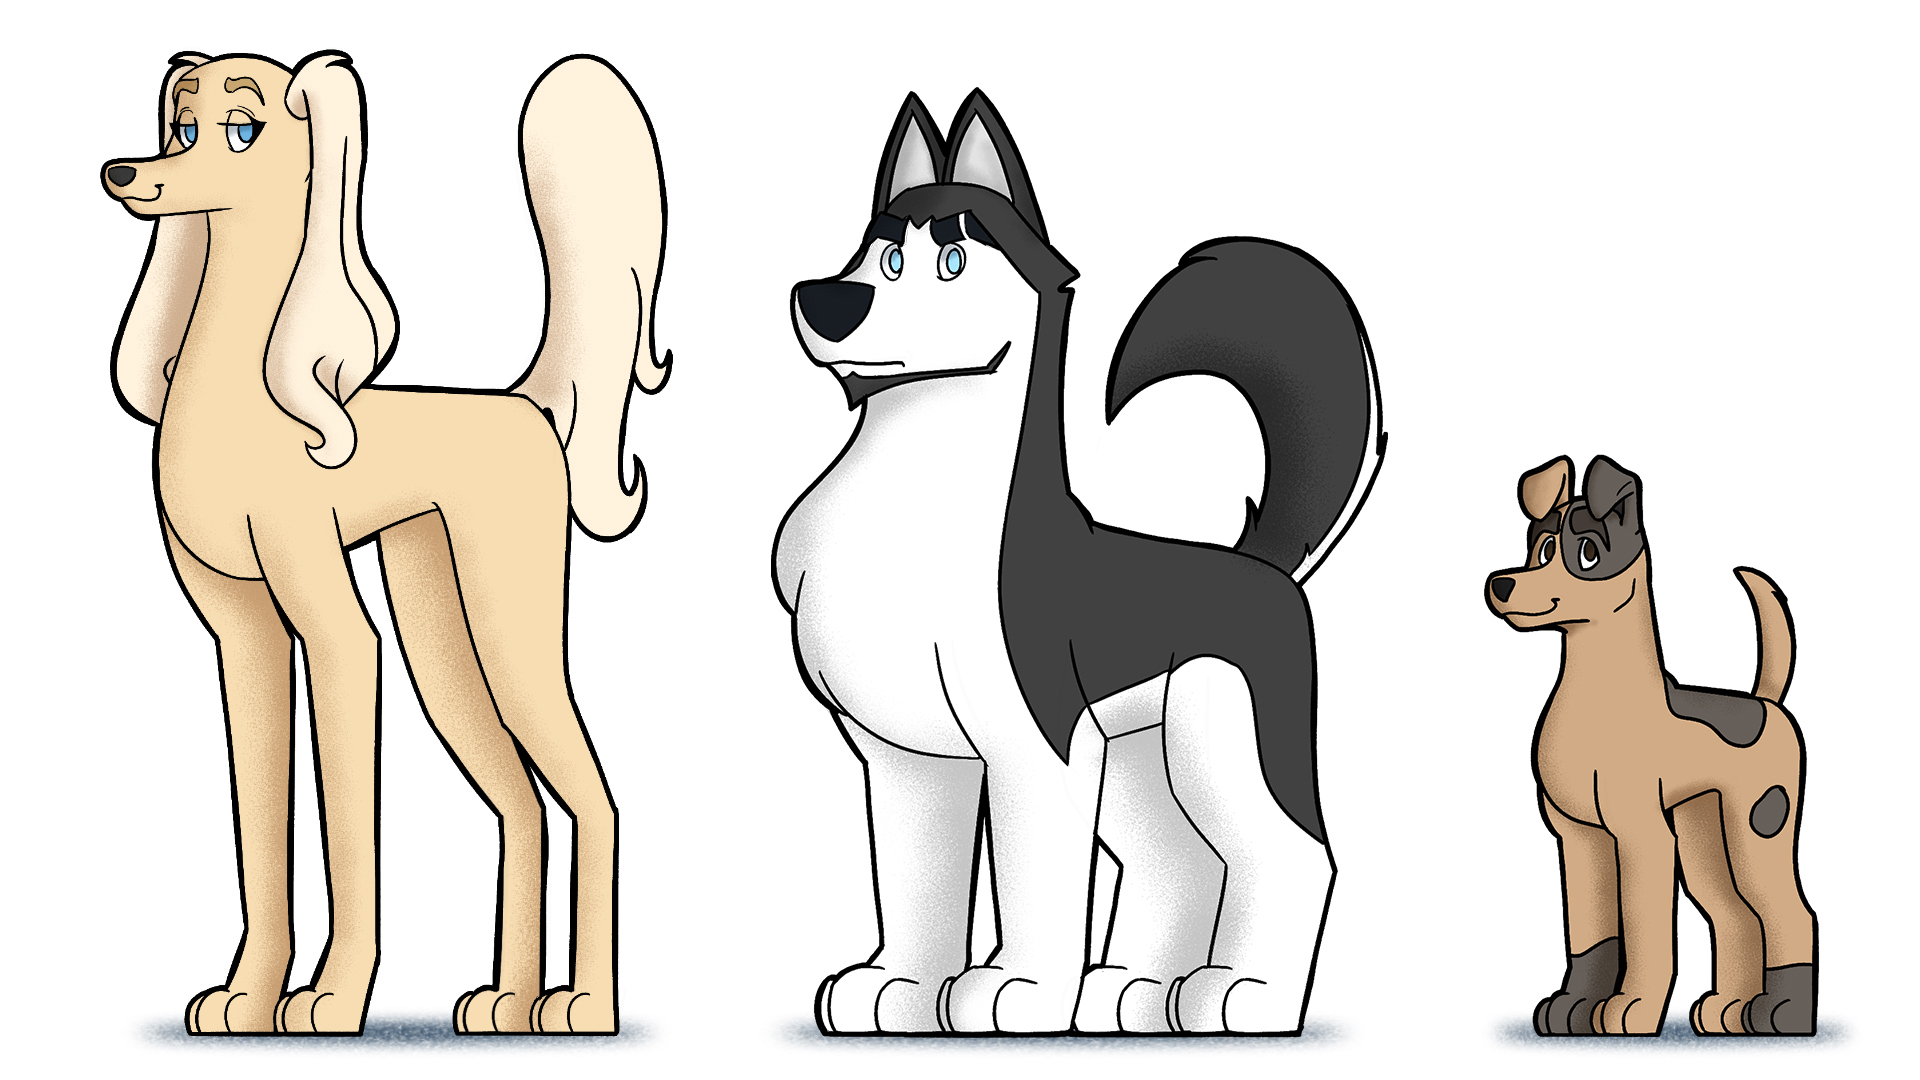 A coloured character lineup of three dogs. On the left is a tall blonde saluki, in the middle a medium sized black and dark grey husky, and on the right is a small light brown and grey terrier.